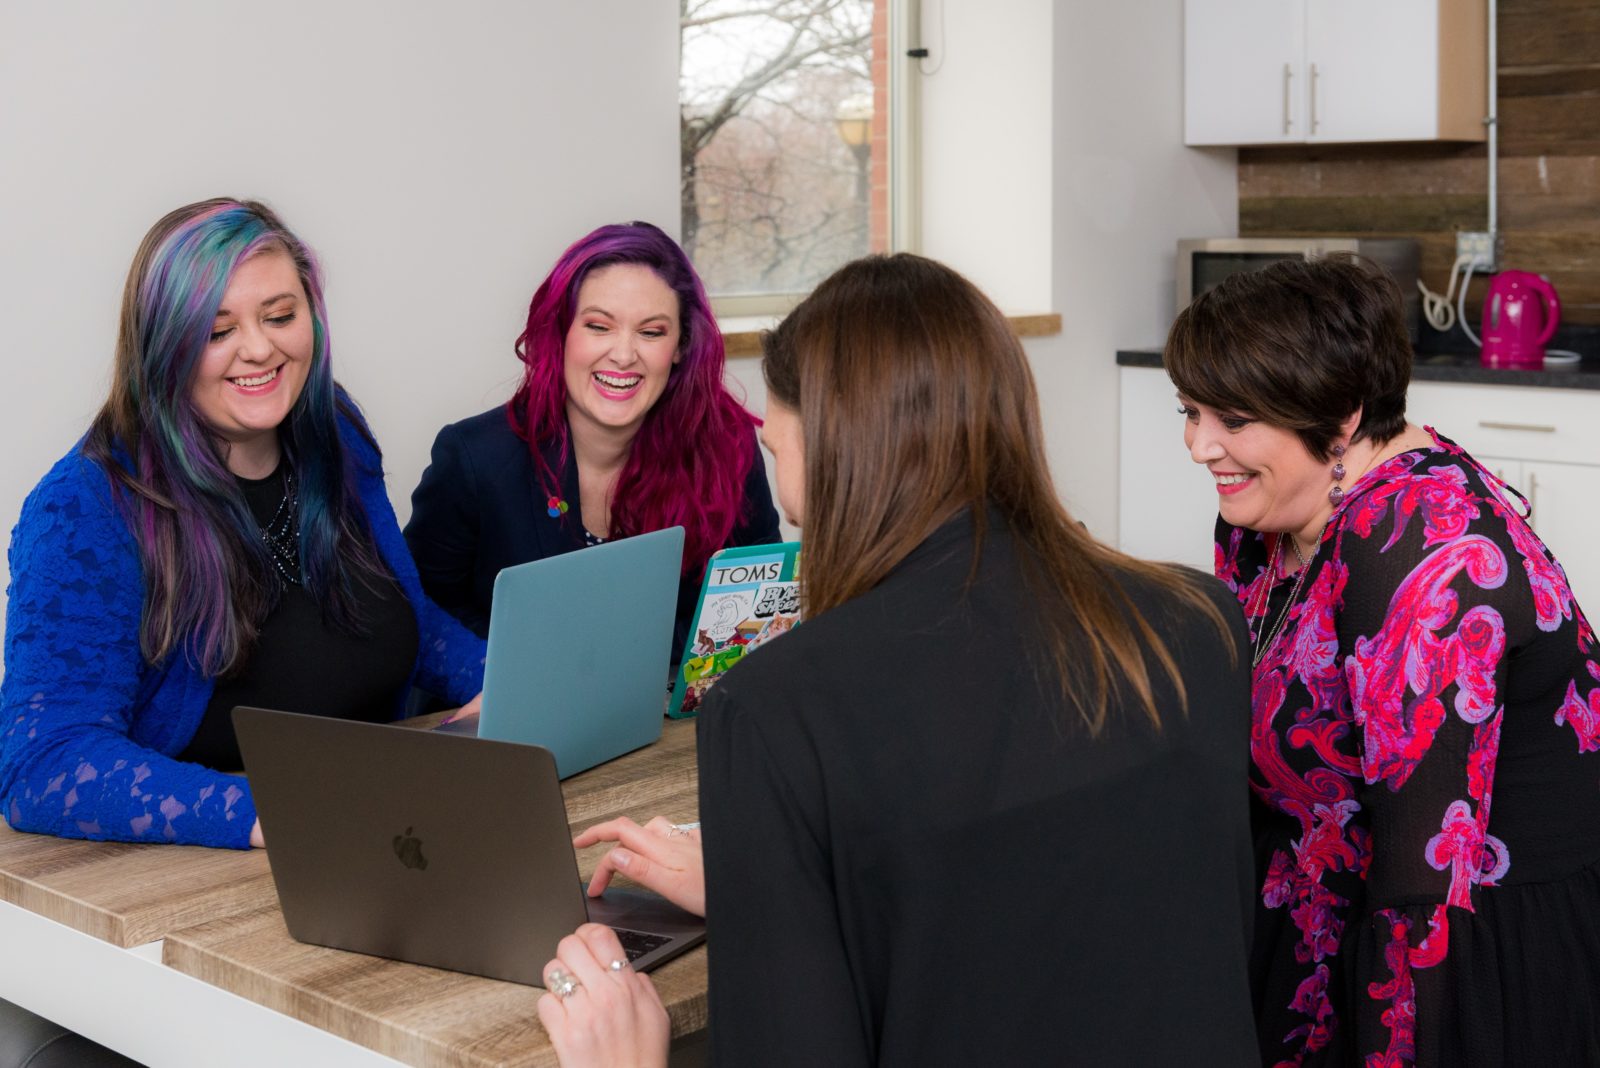 4 women sit around an office table smiling and working on their laptops